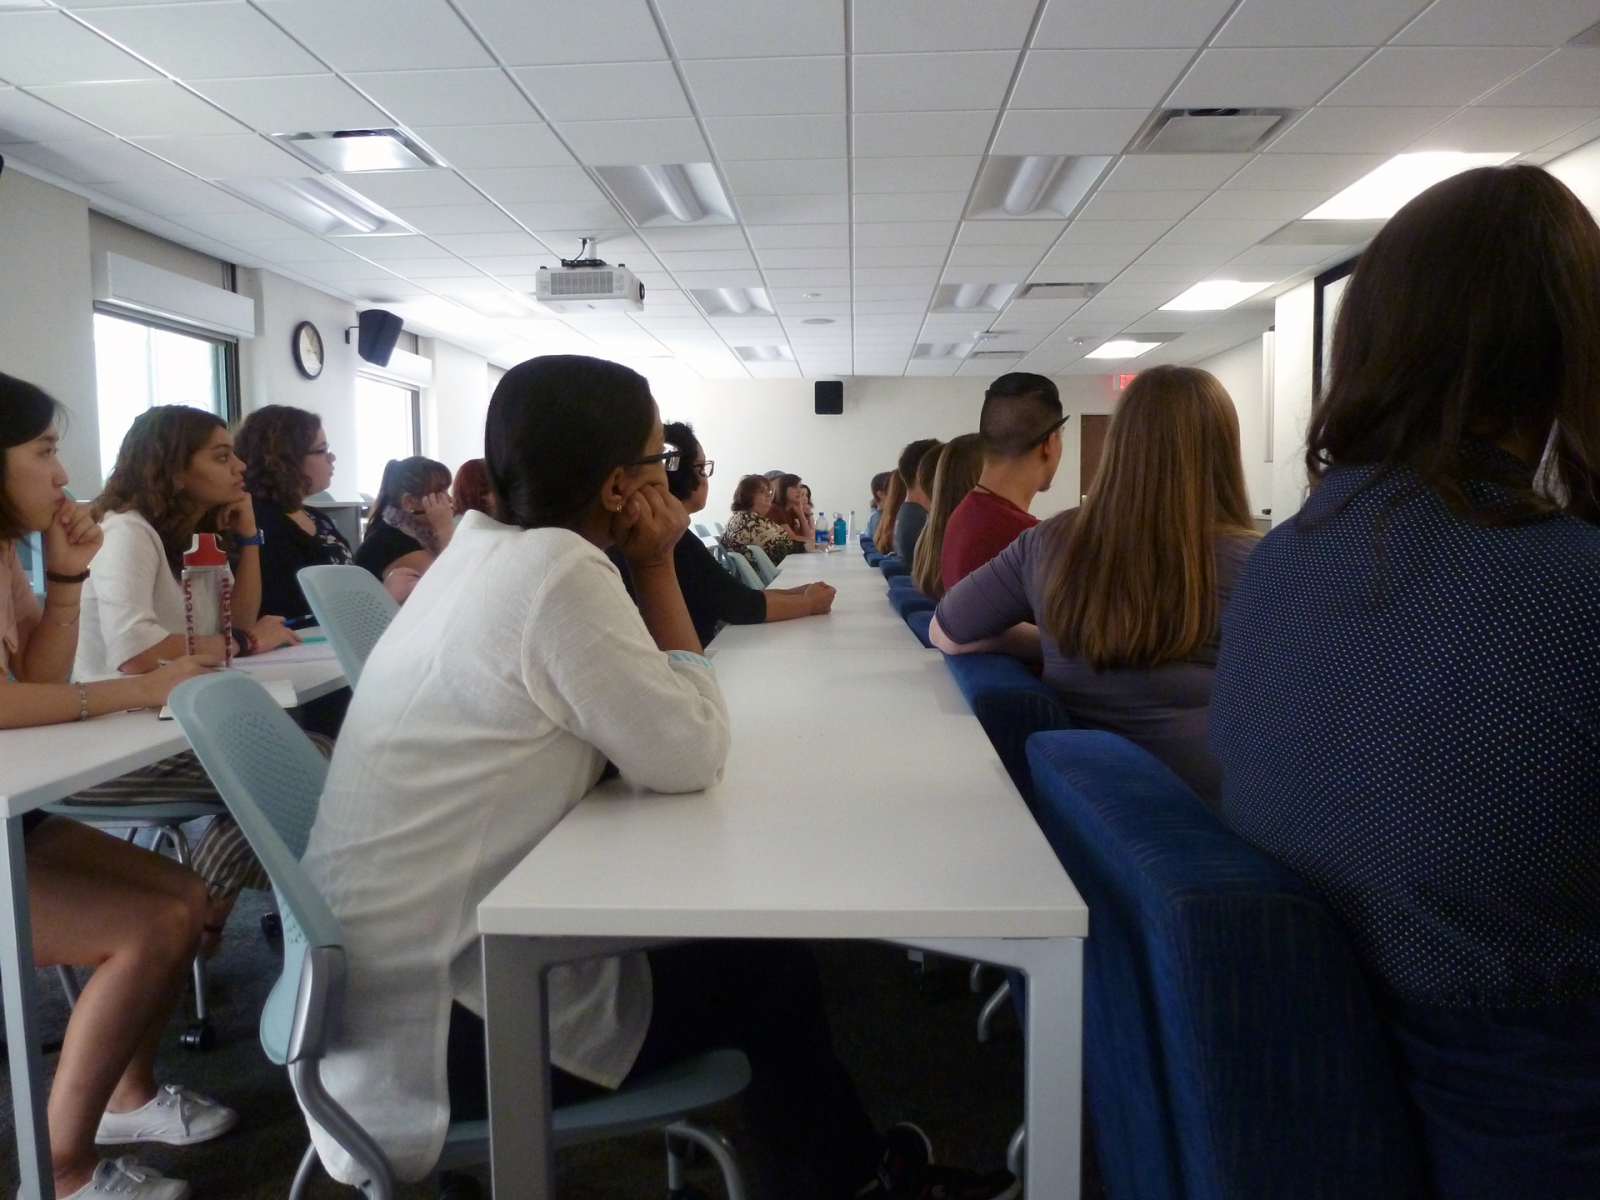 Graduate students listen intently during an orientation meeting